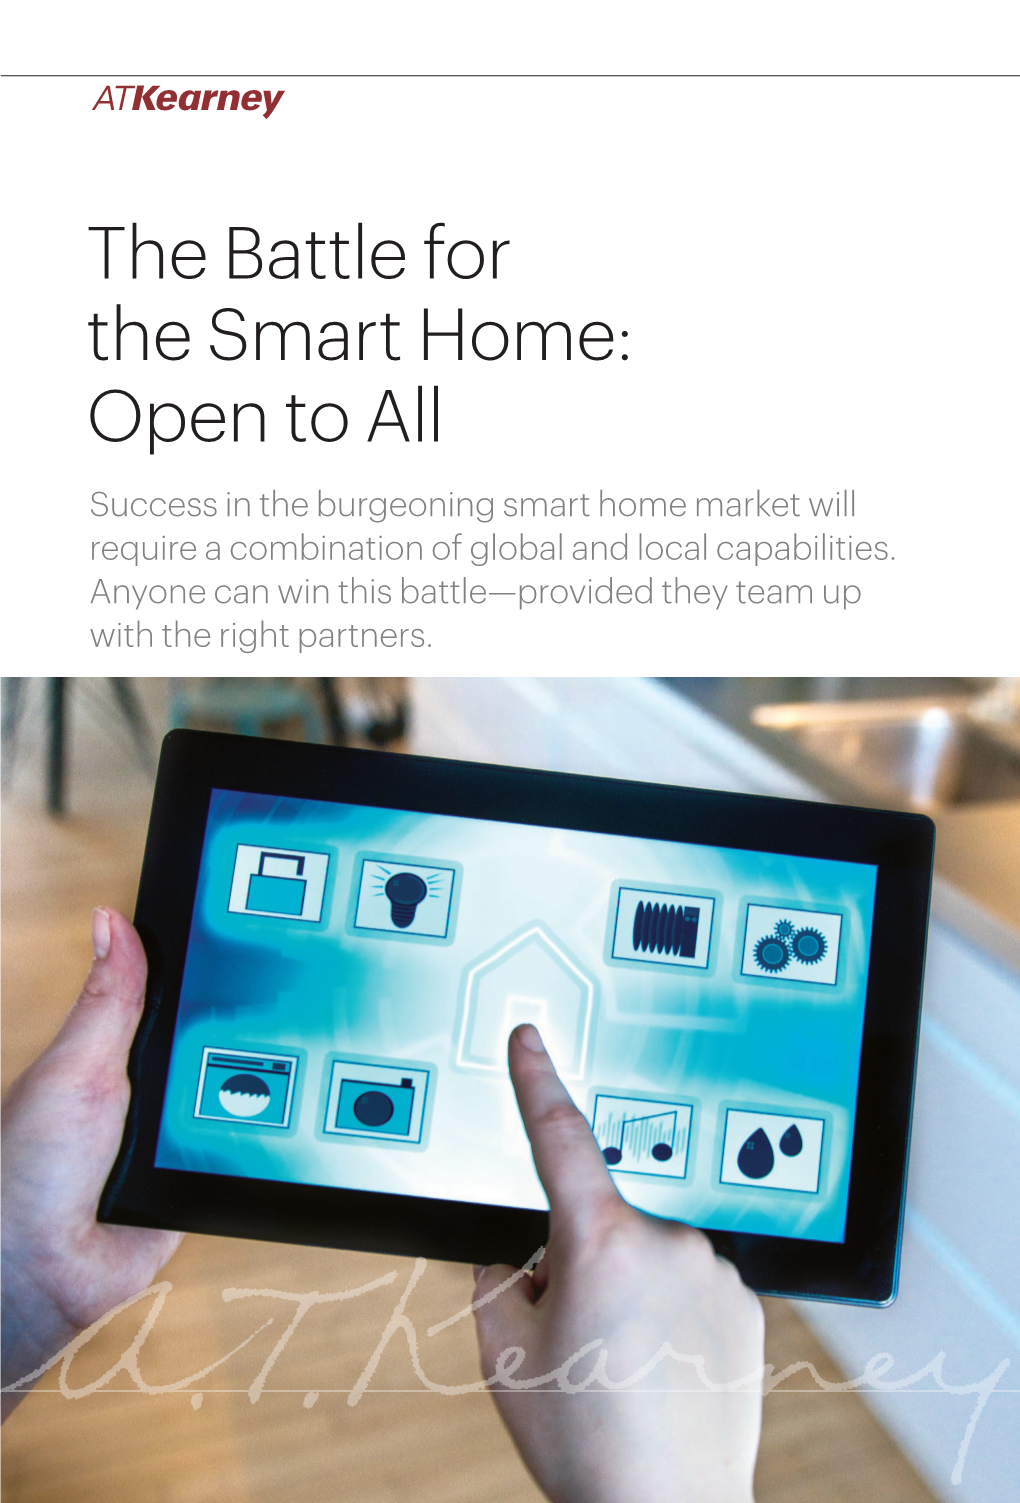 The Battle for the Smart Home: Open to All Success in the Burgeoning Smart Home Market Will Require a Combination of Global and Local Capabilities